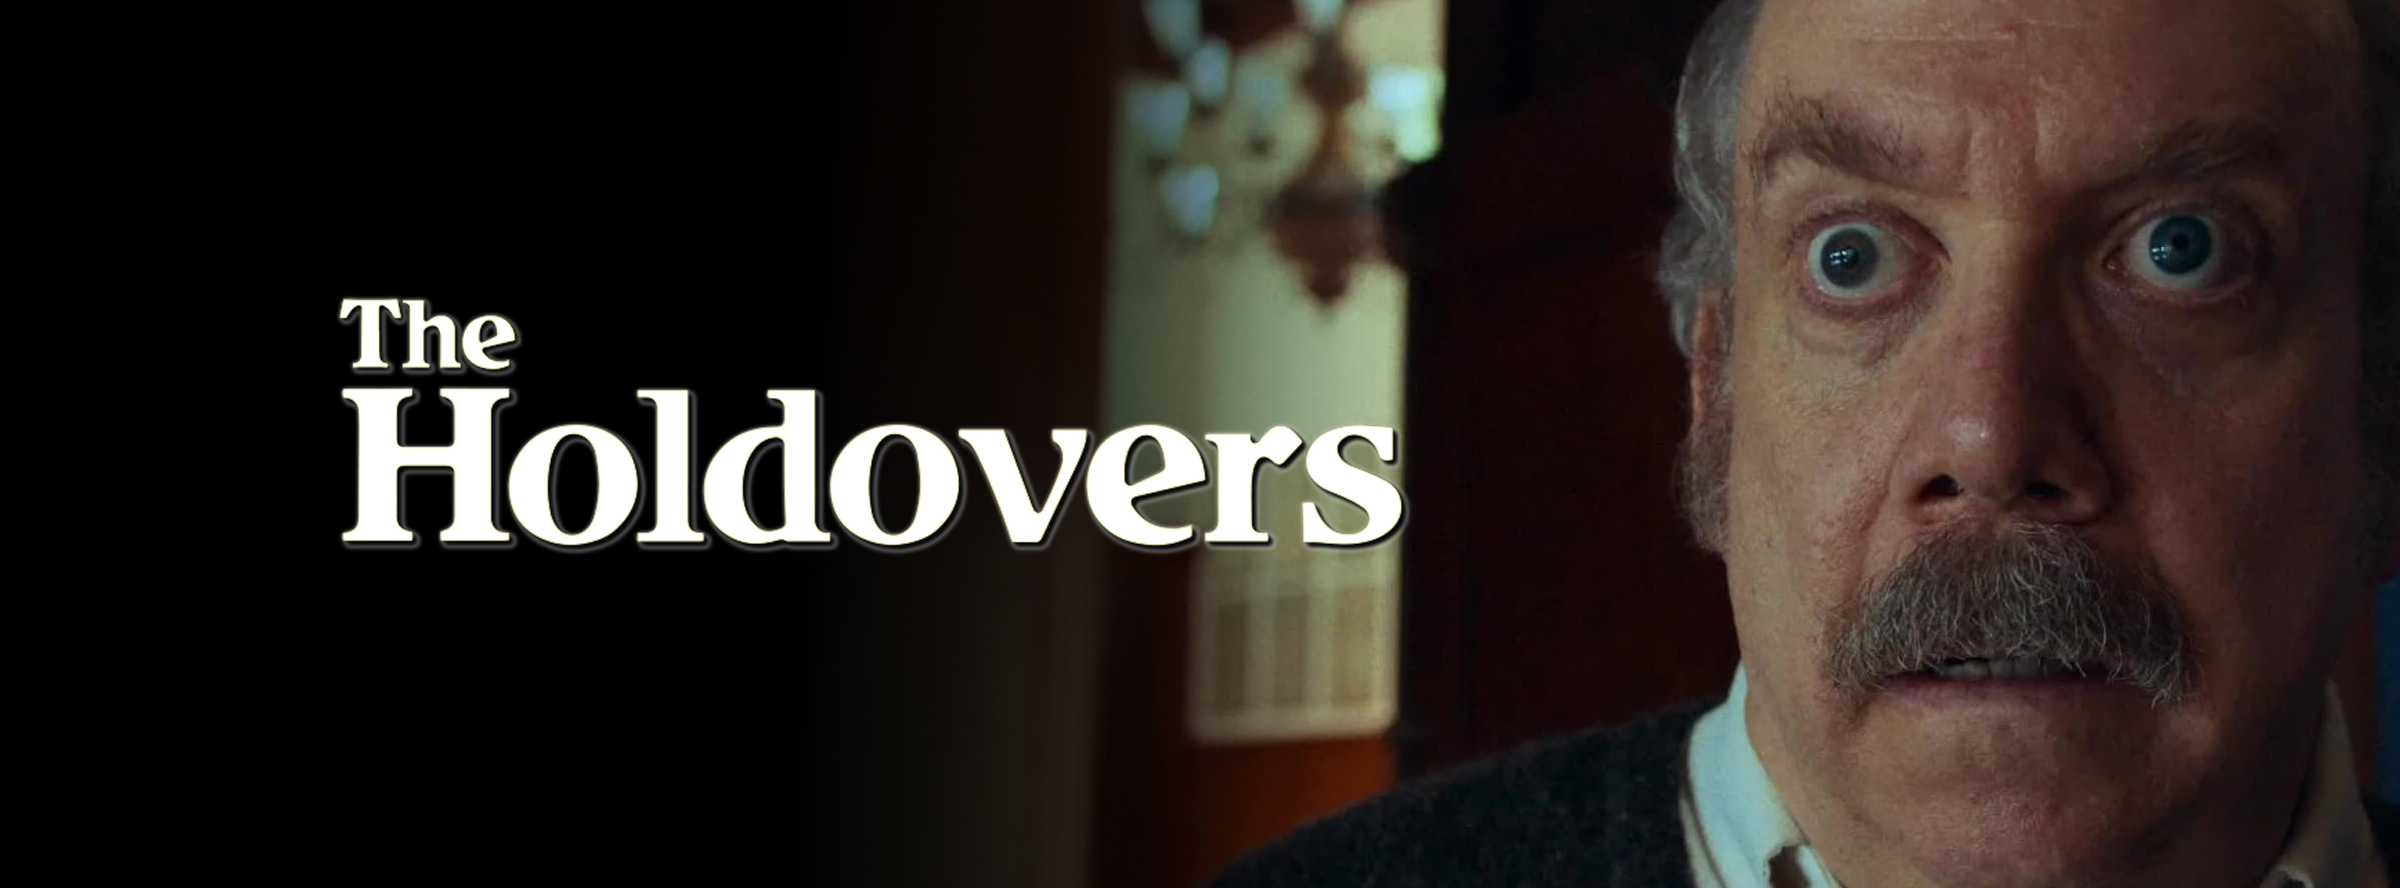 Slider Image for The Holdovers